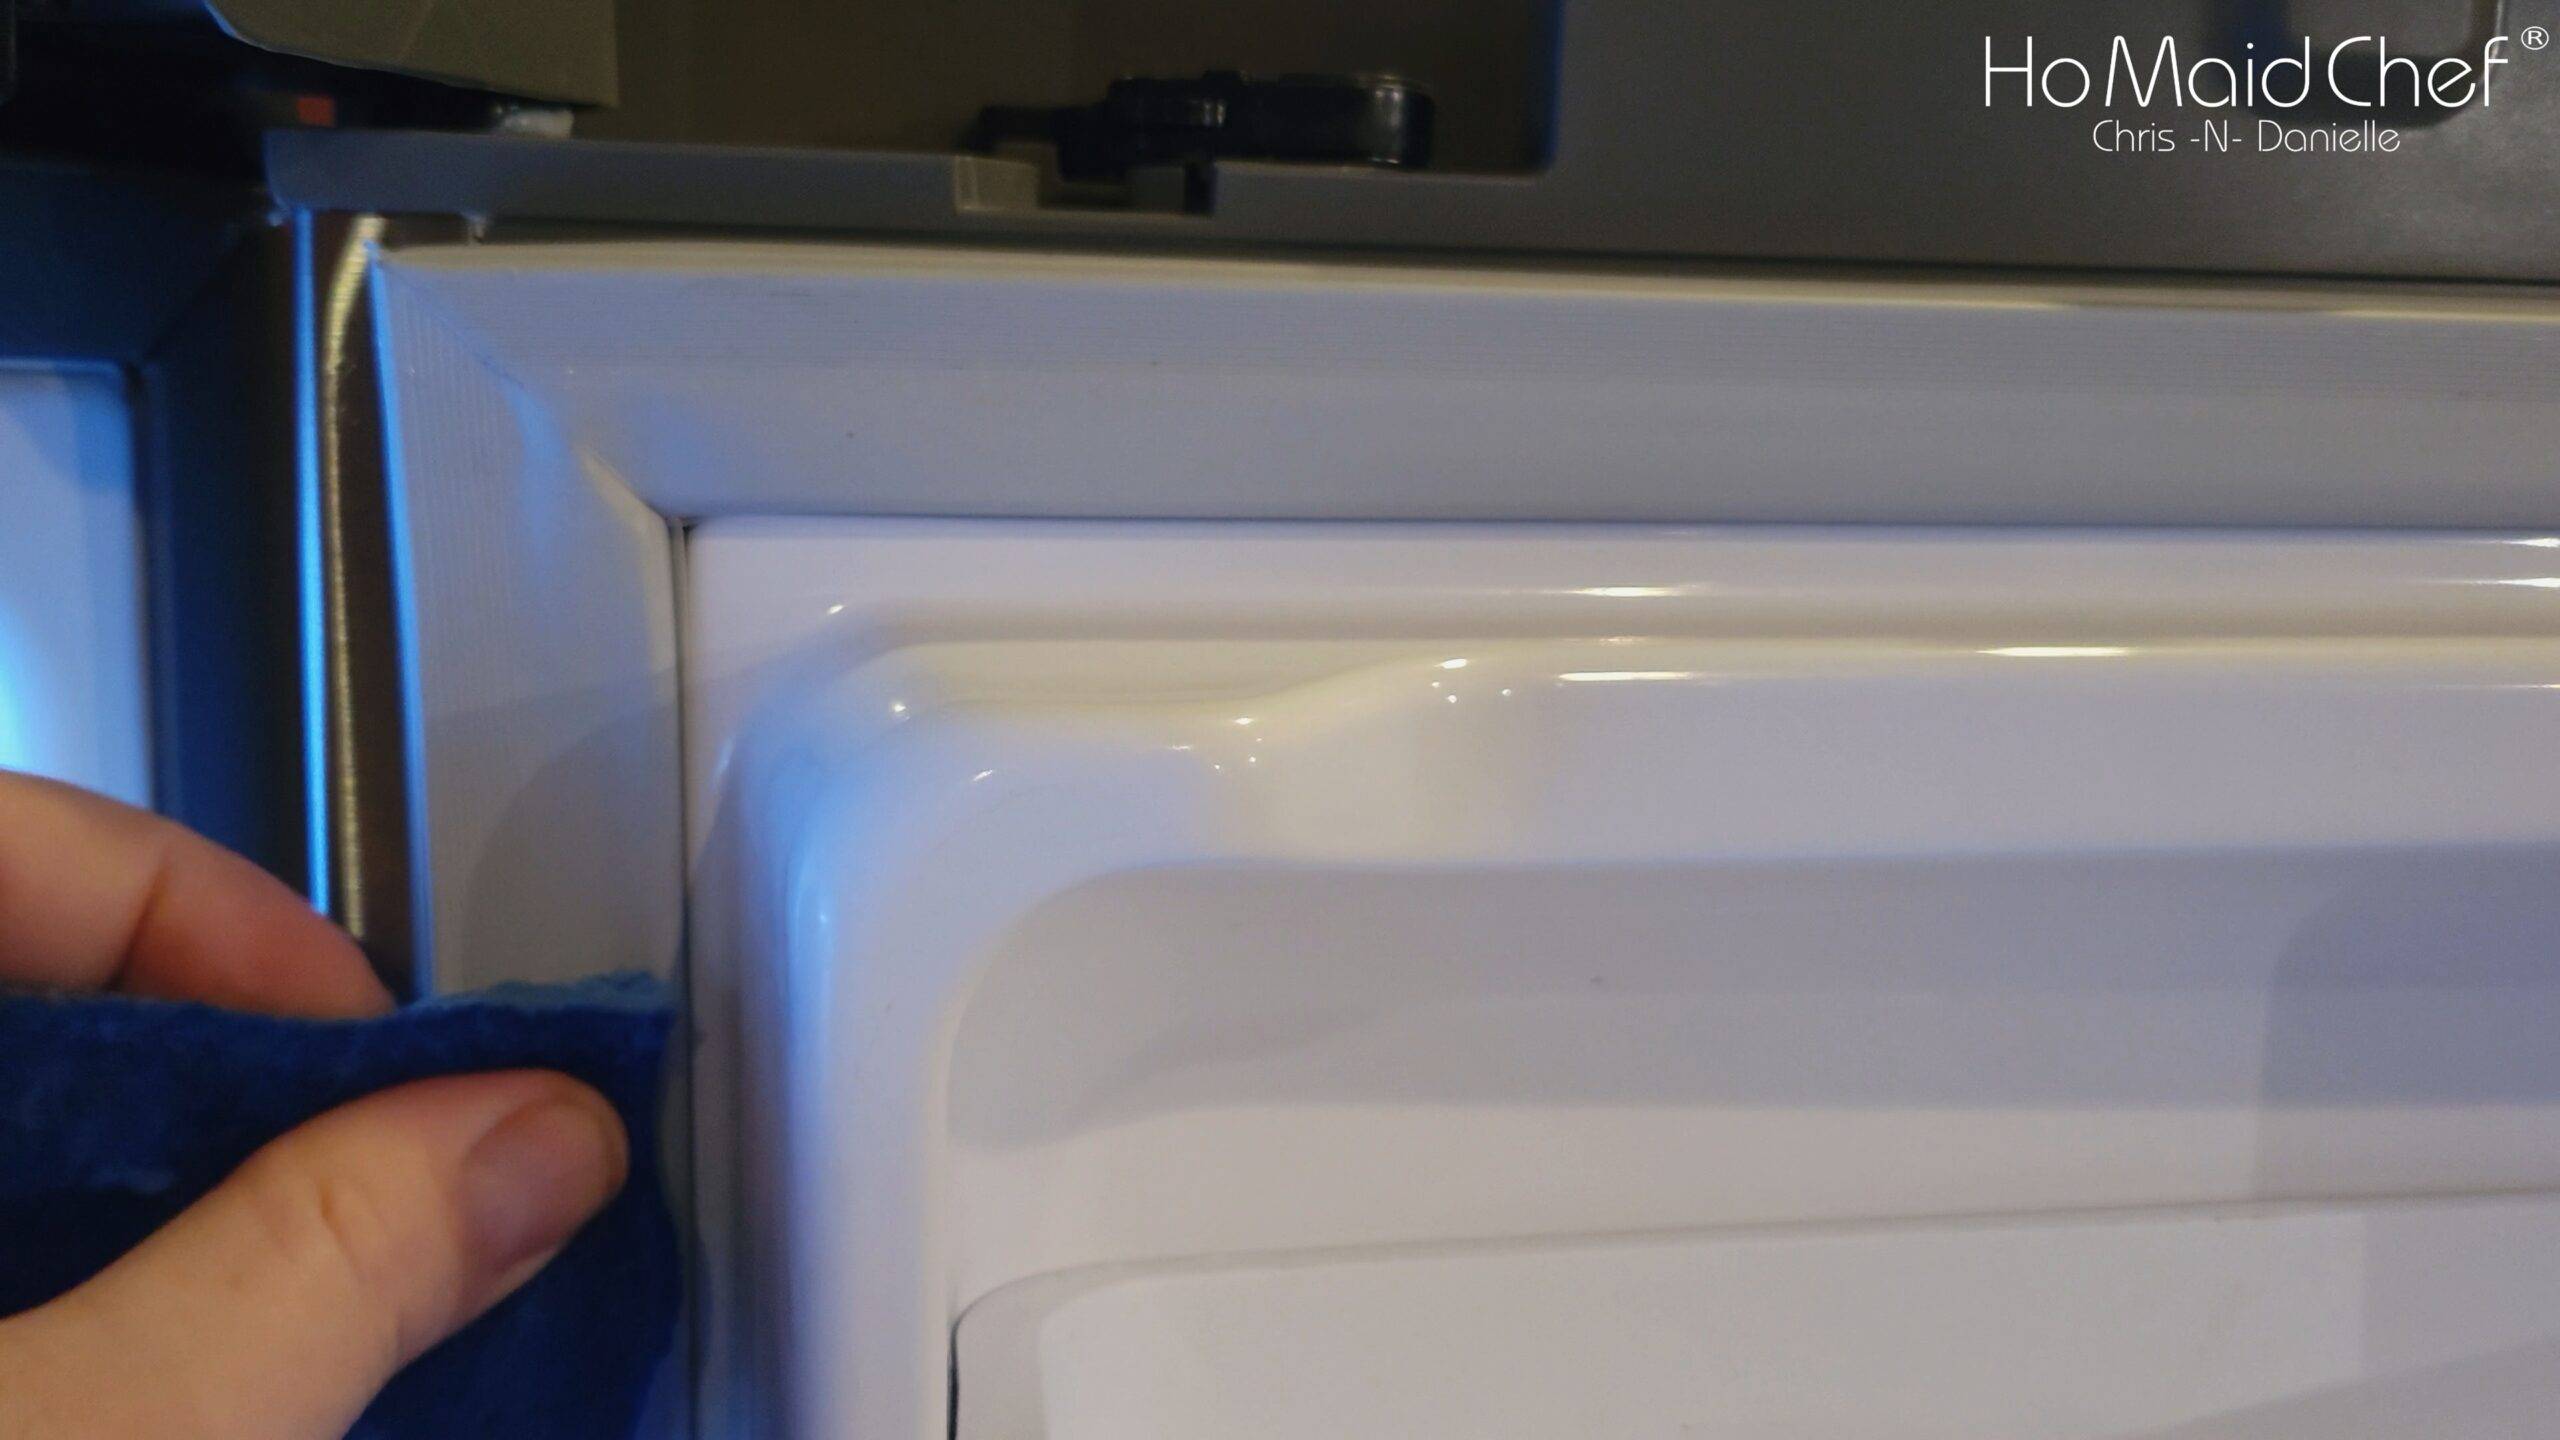 Clean Fridge Seal To Help Prevent Ice Buildup - Chris Does What